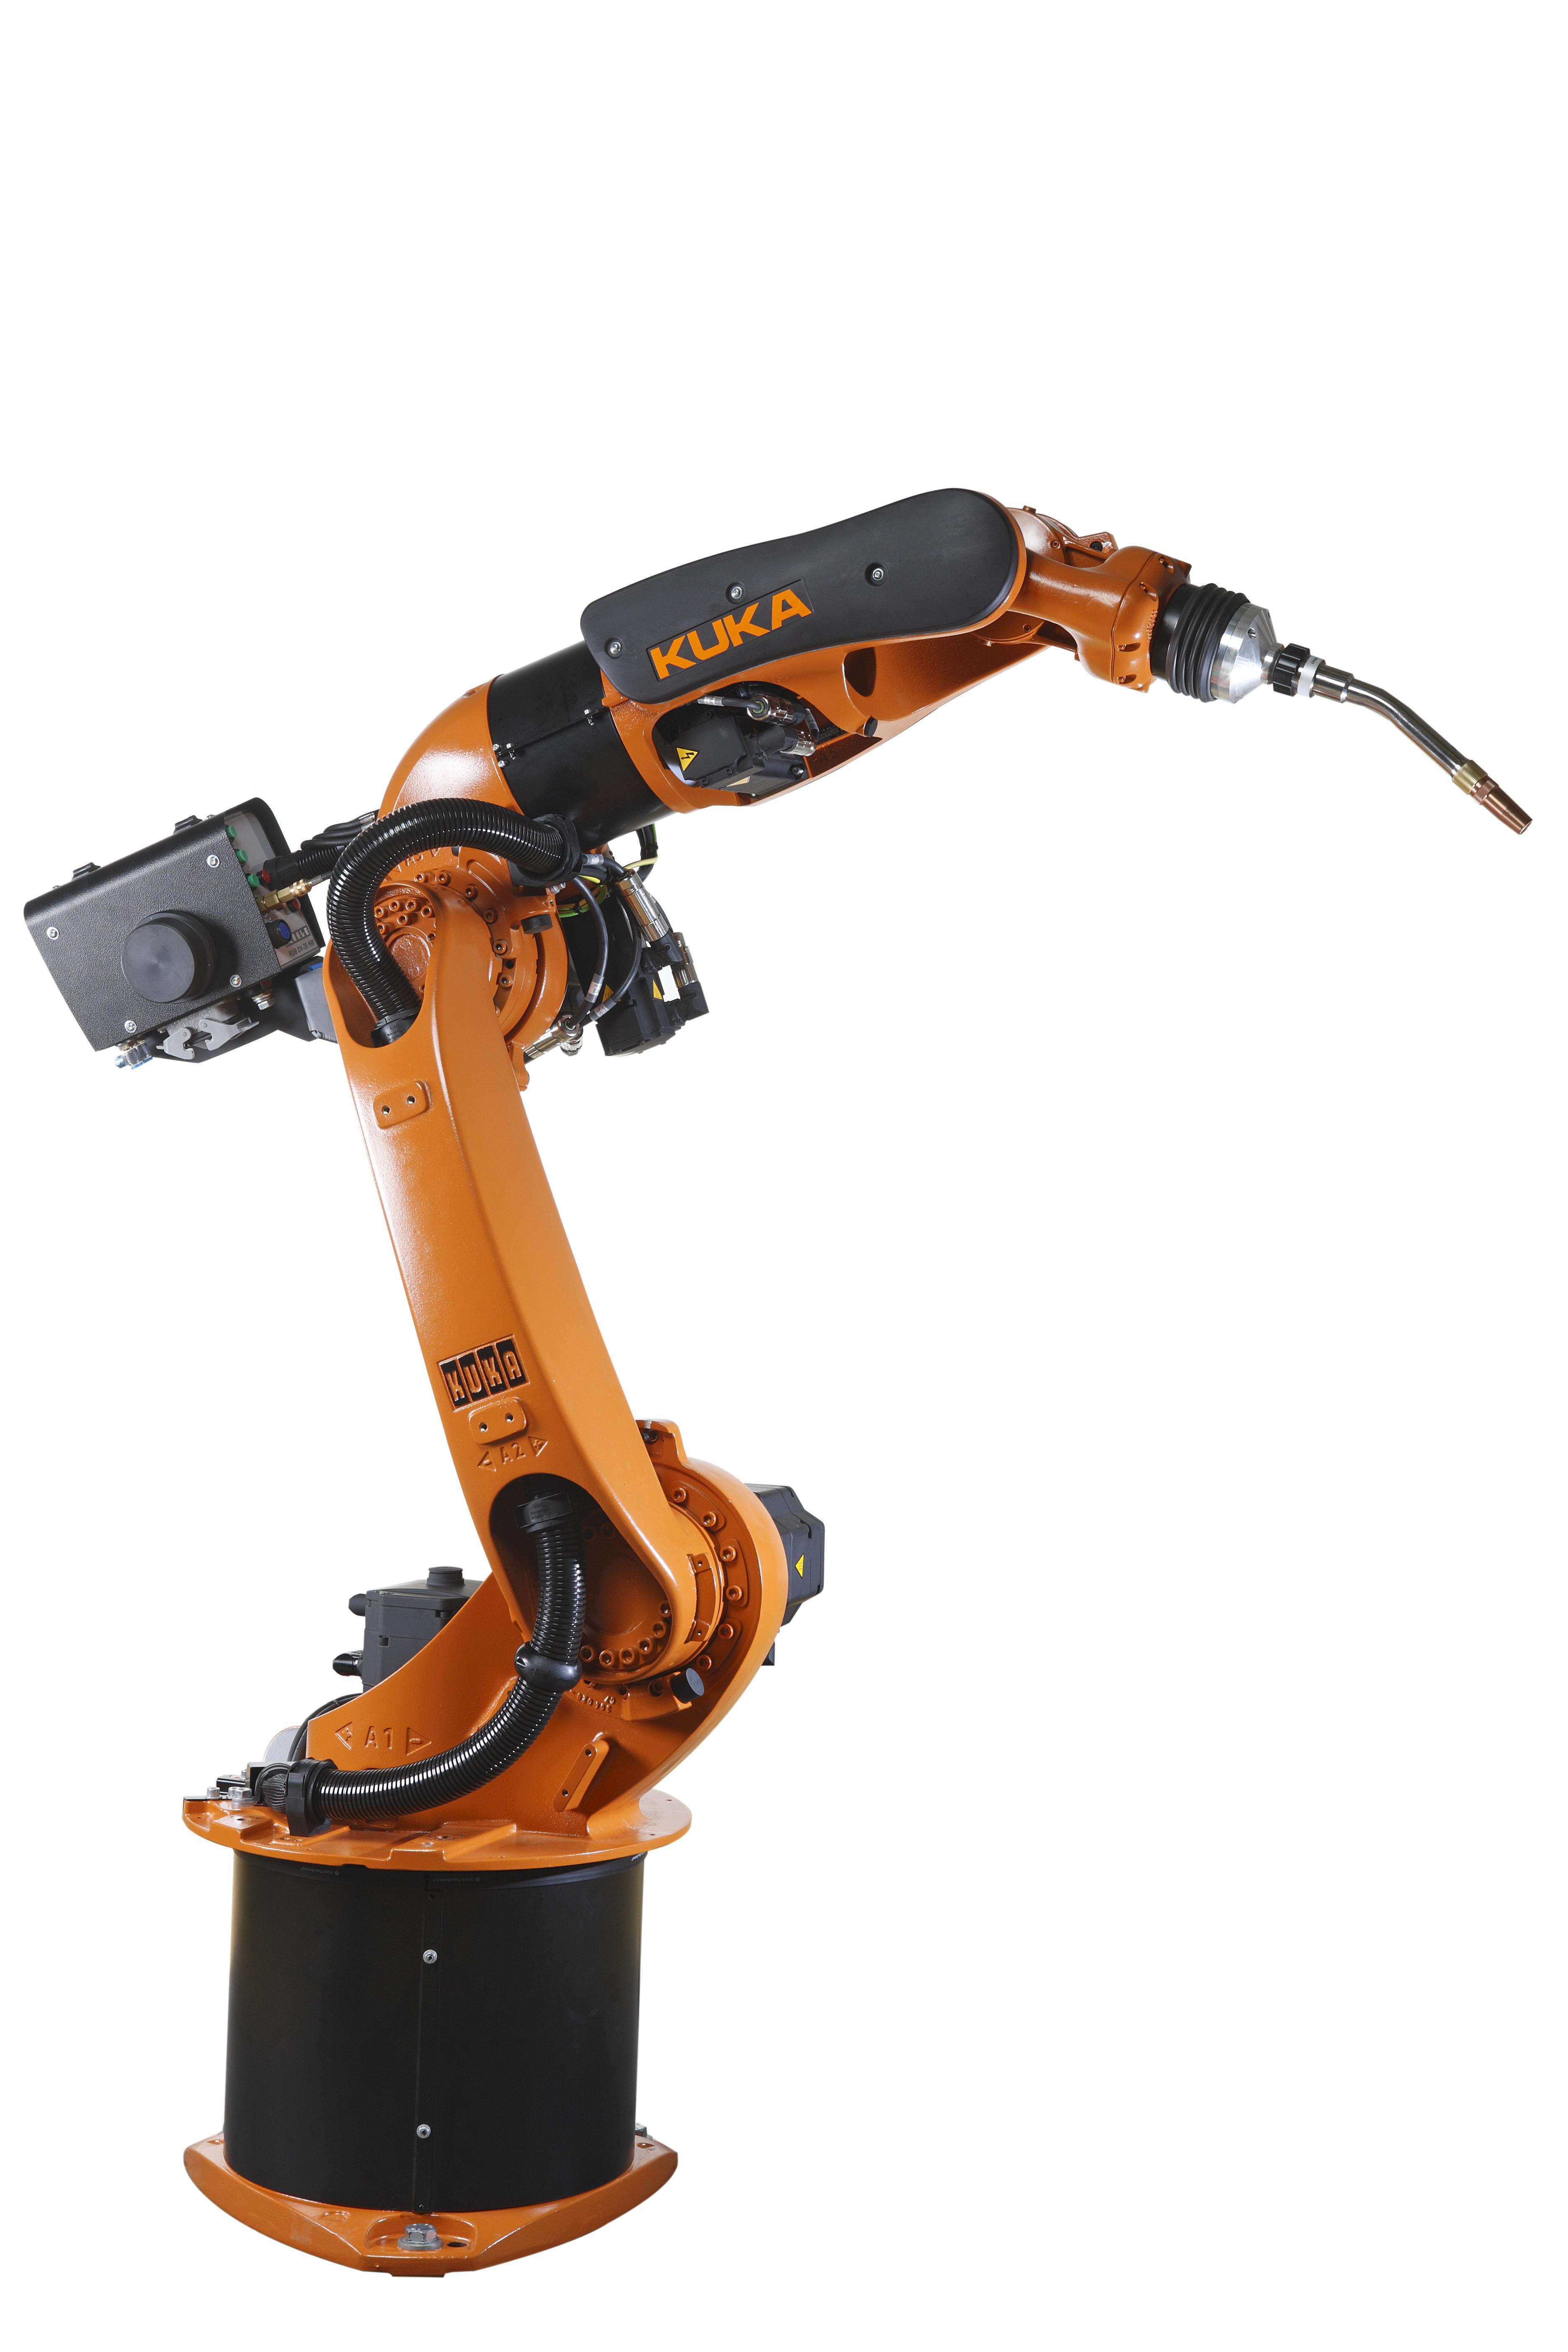 Making the Cut KUKA Robotics Corporation at FABTECH Chicago Business Wire